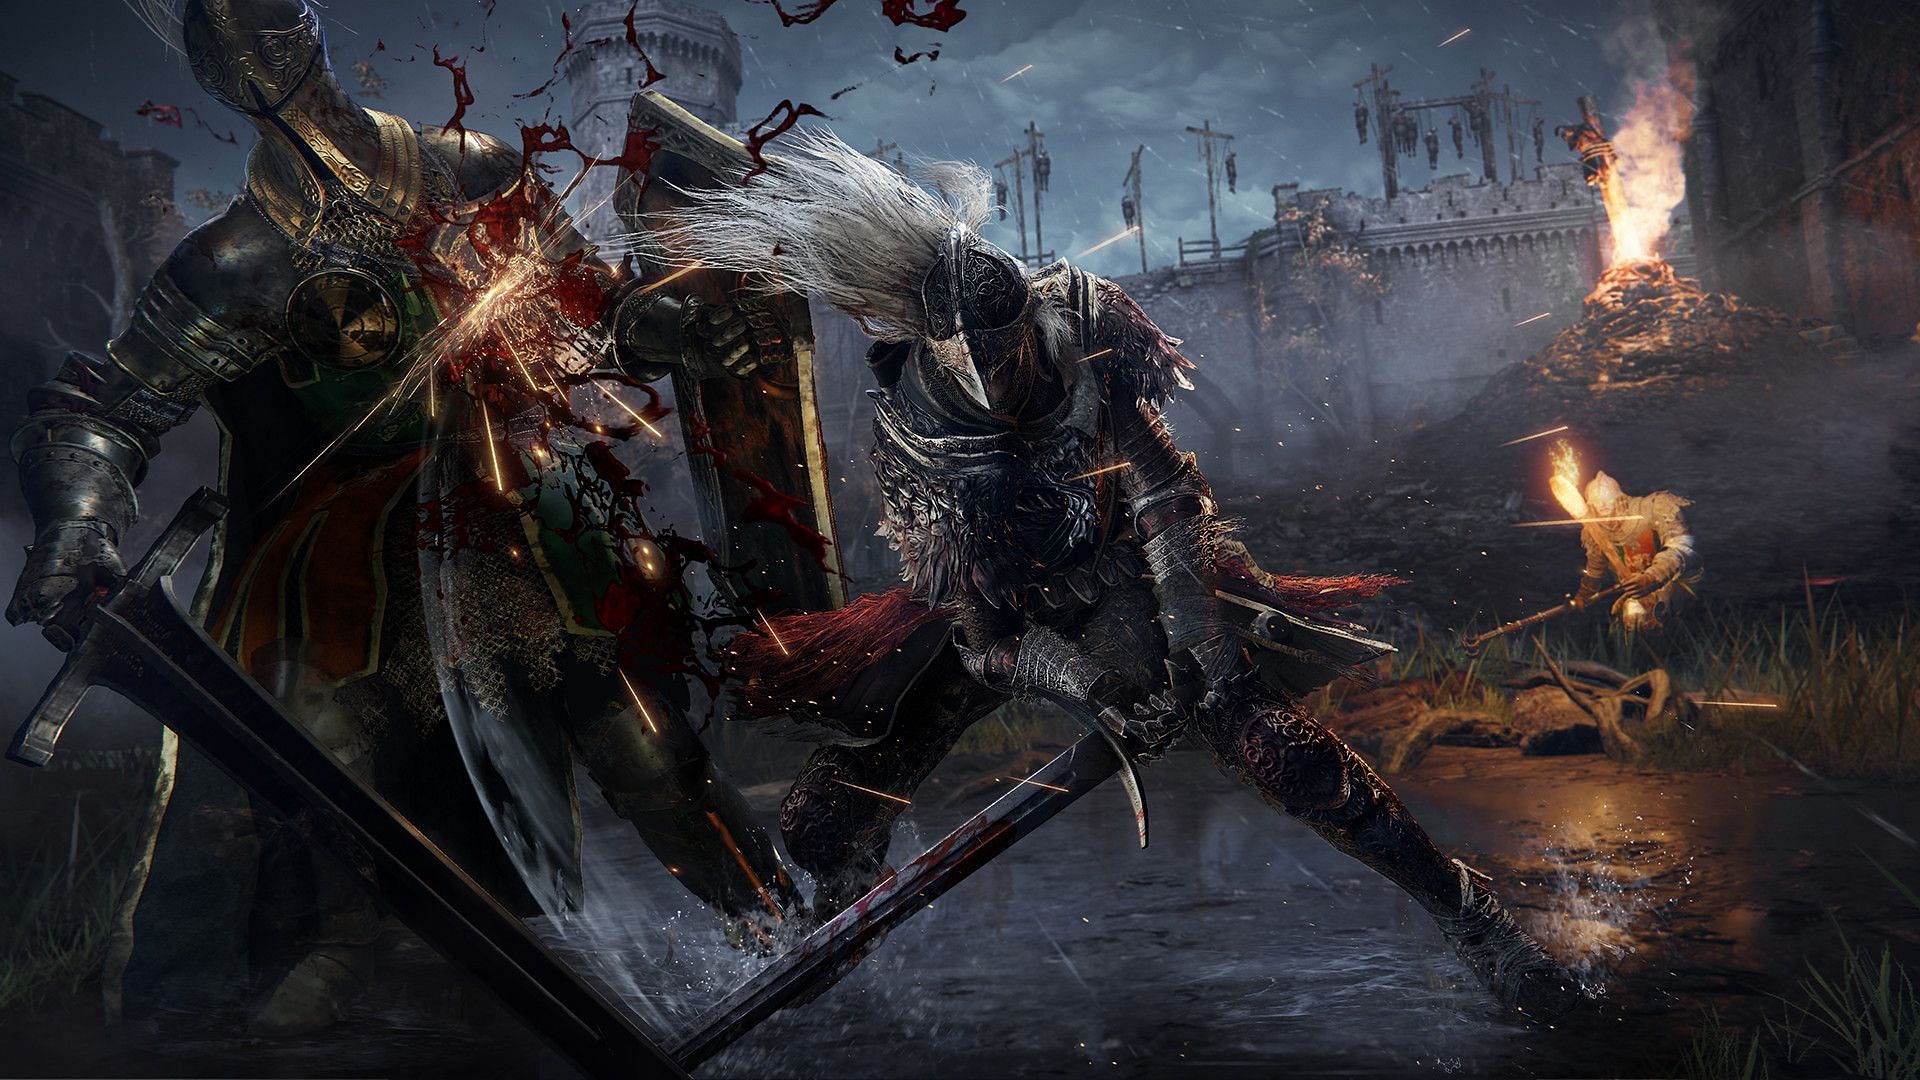 Players should be careful to weave defense into their tactics for this tough fight. (Image via FromSoftware Inc.)